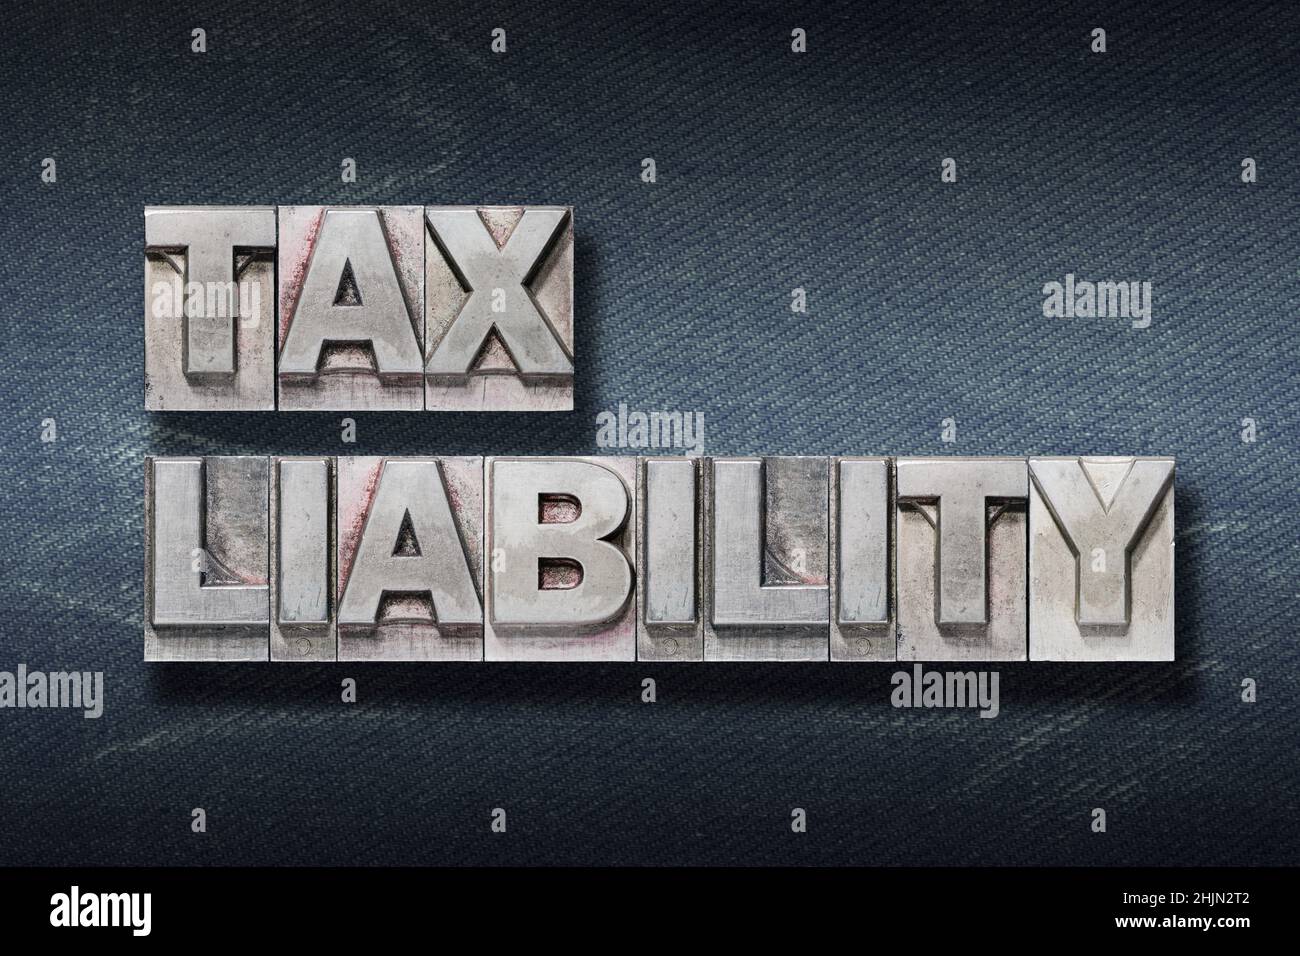 tax liability phrase made from metallic letterpress on dark jeans background Stock Photo